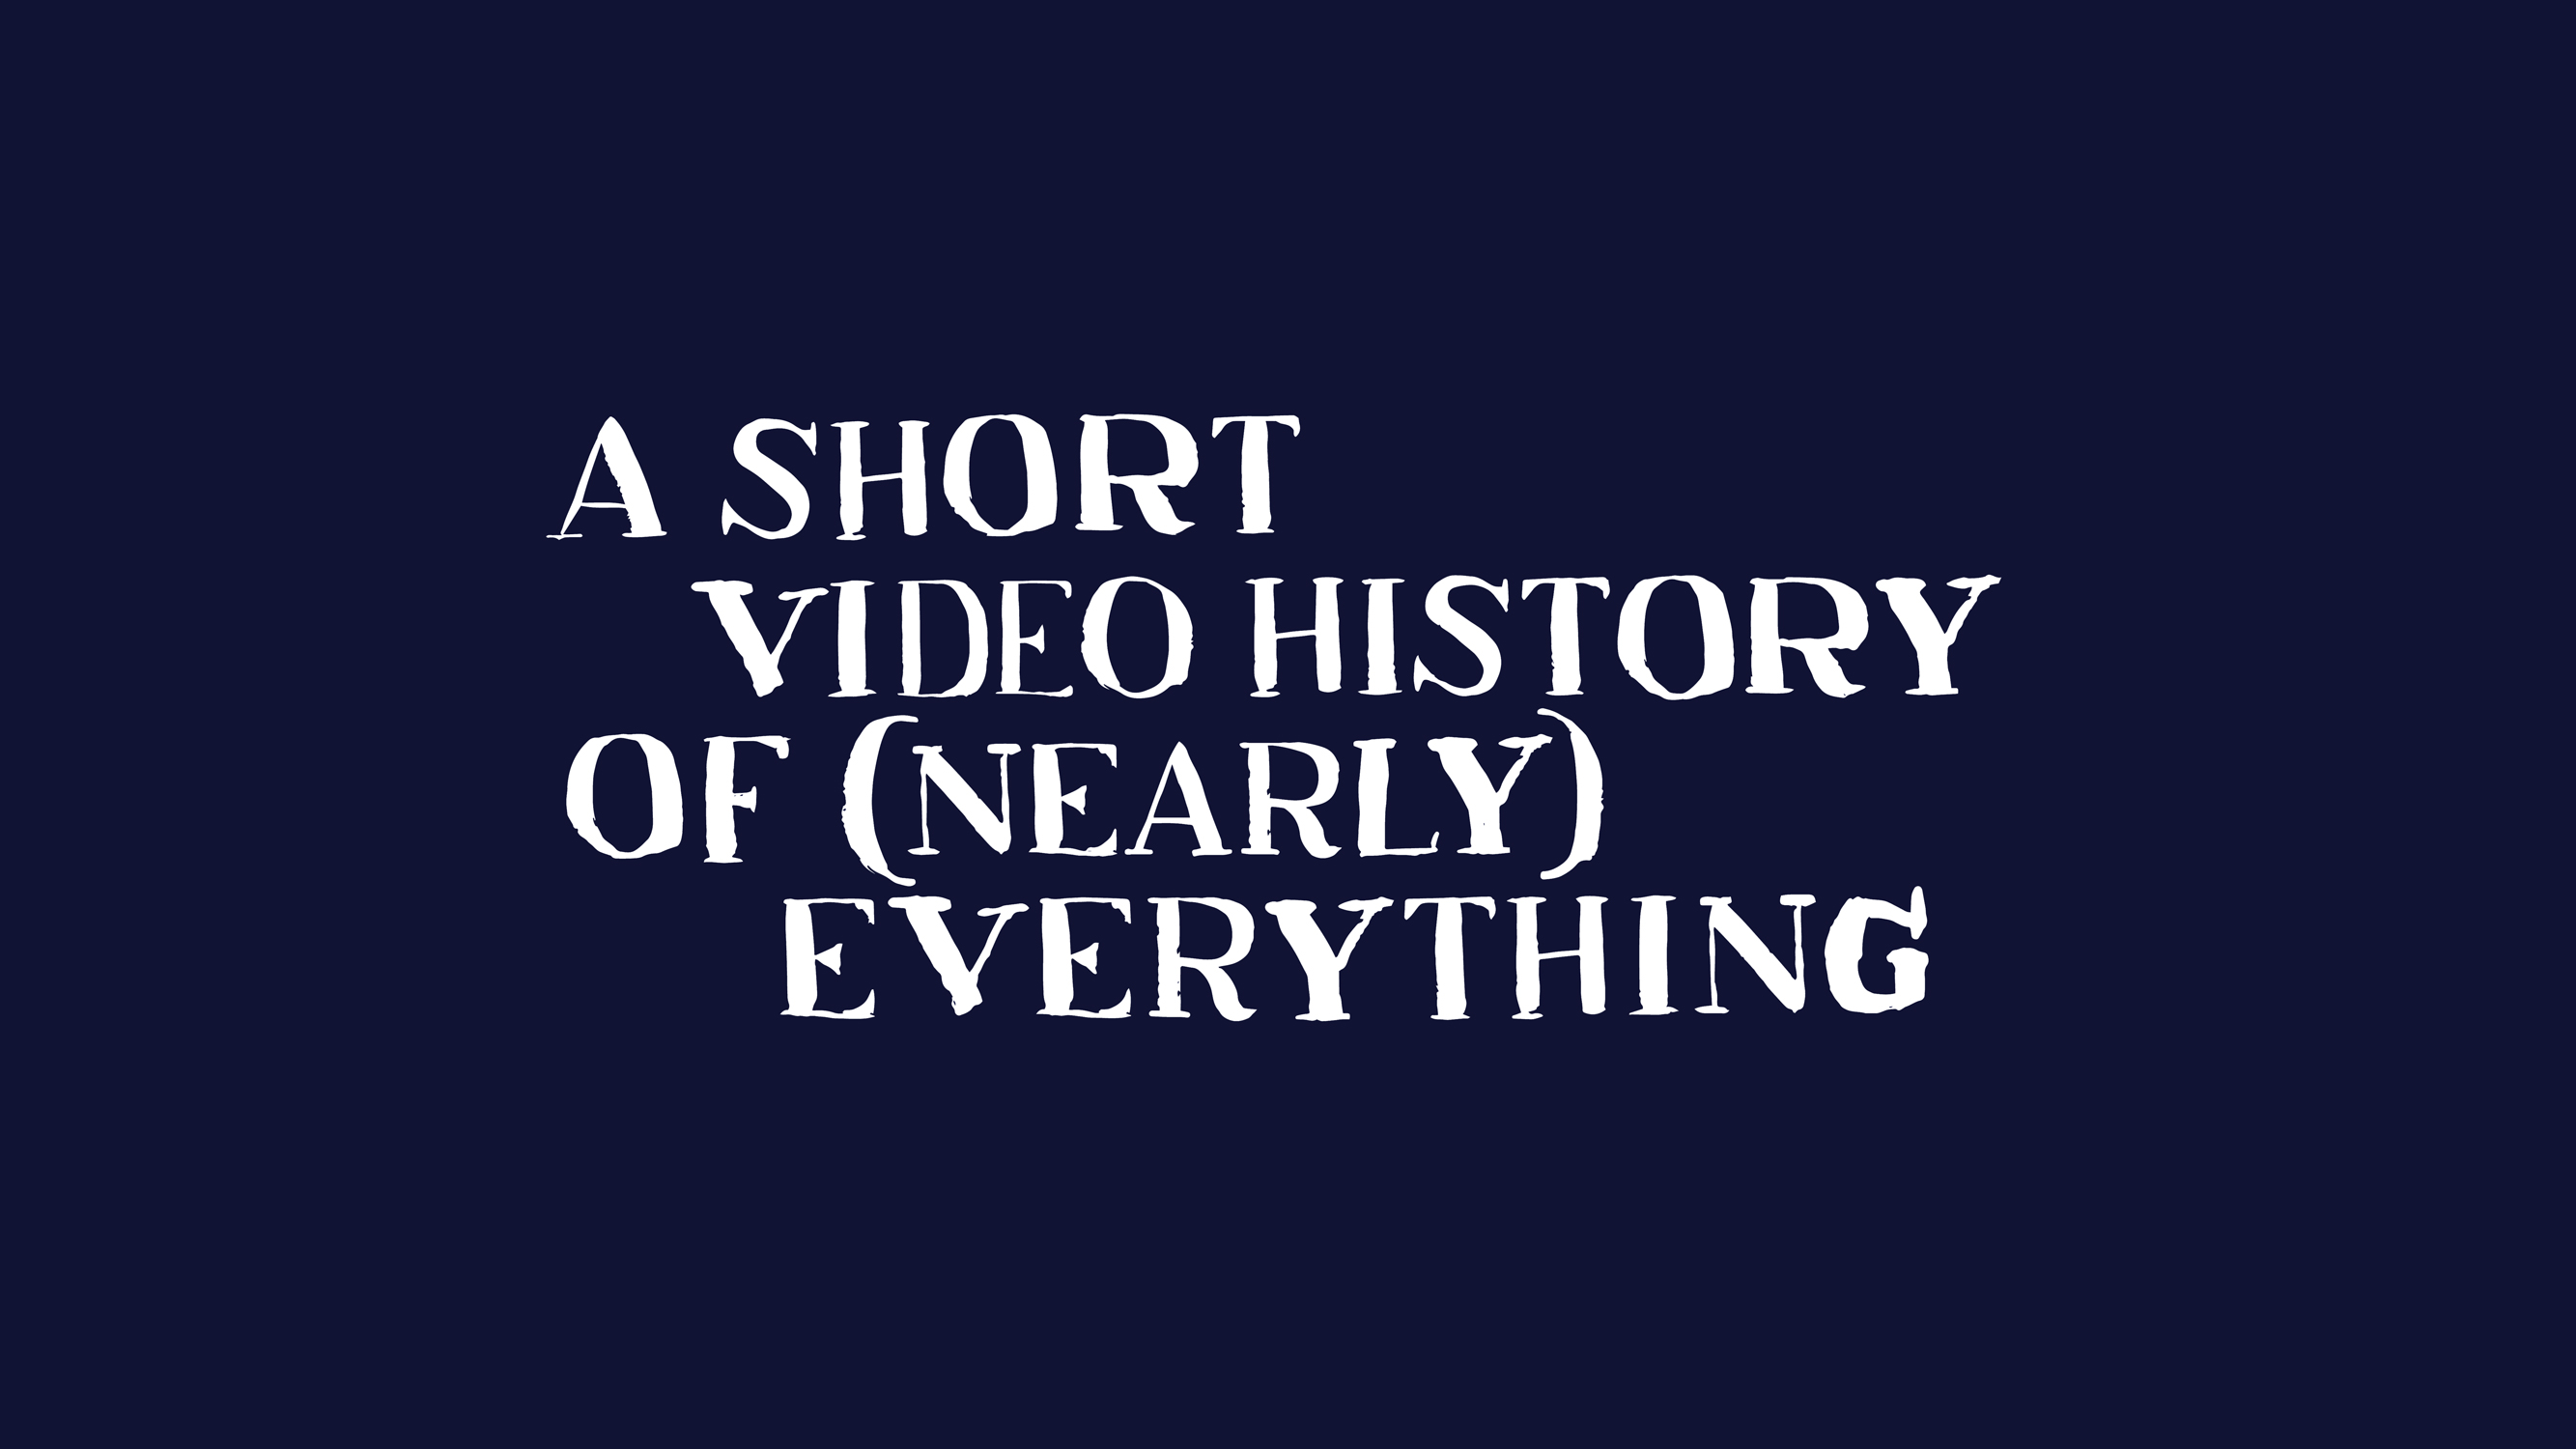 A Short Video History of (Nearly) Everything